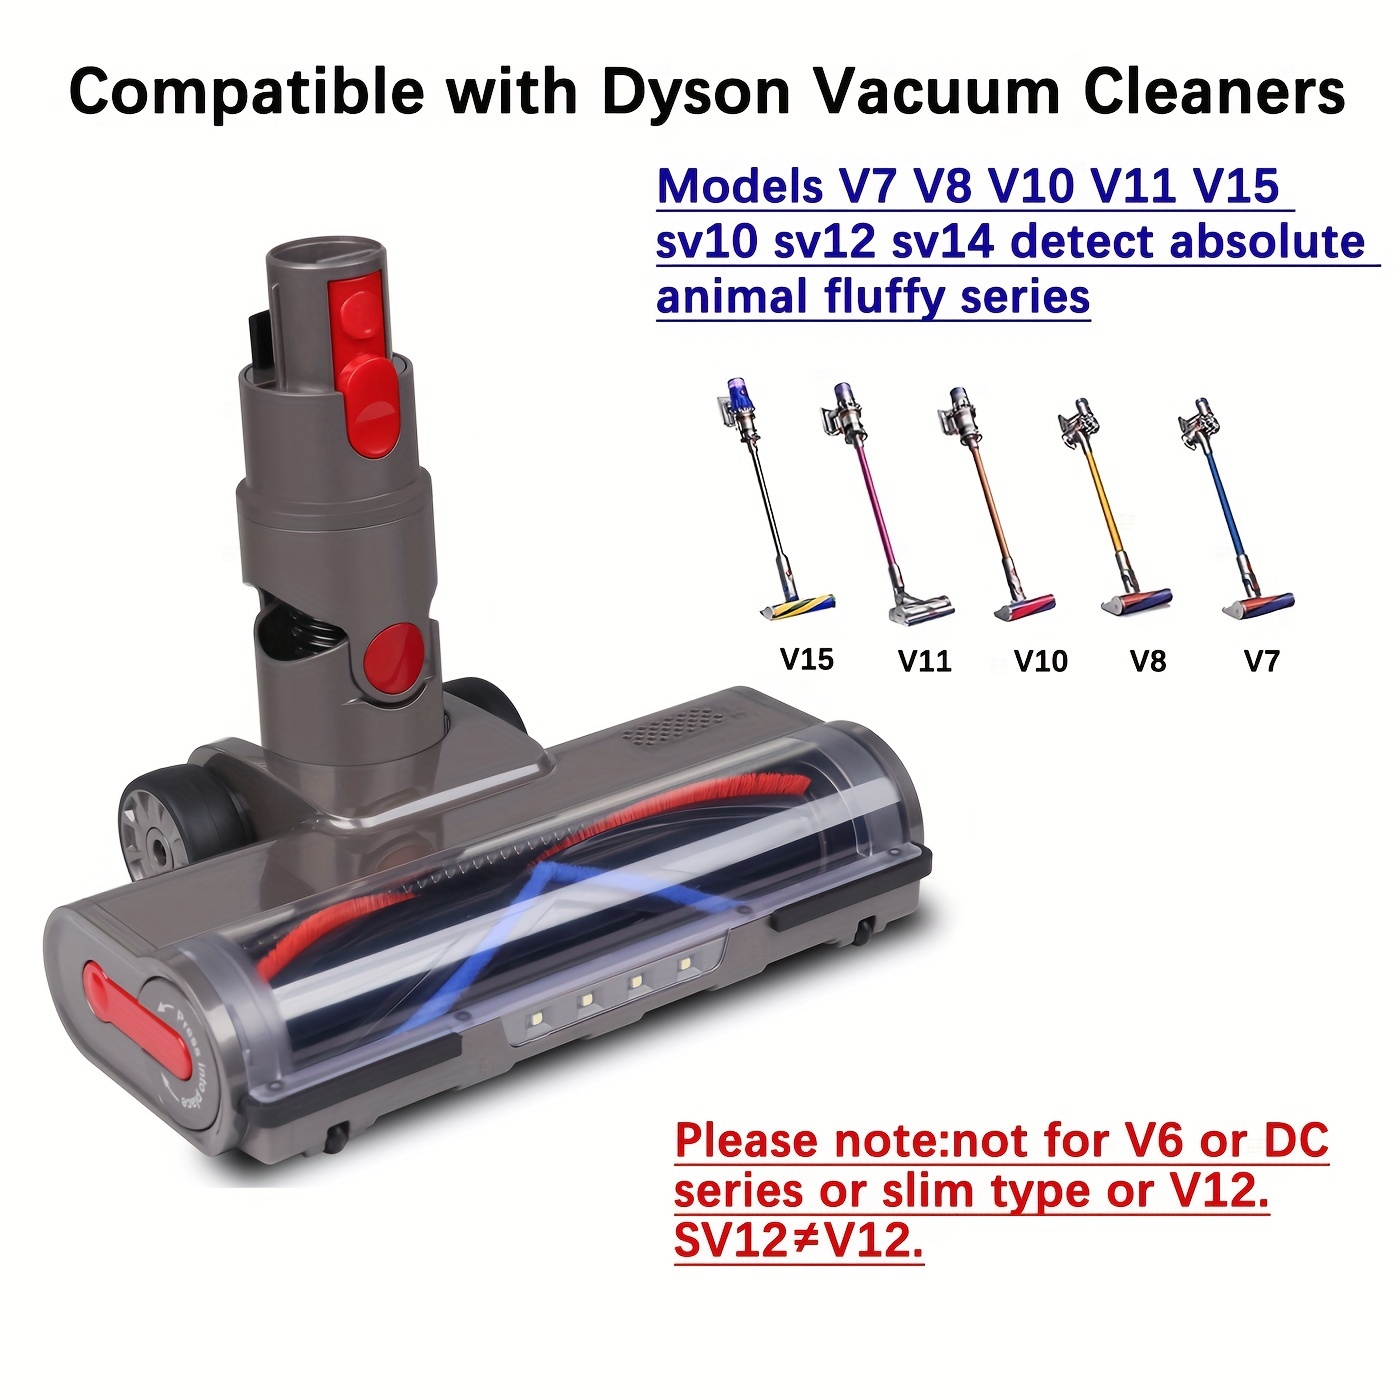 Motorhead Hardwood Floor Attachment for Dyson V7 V8 V10 V11 V15 Vacuum  Cleaners with LED Headlights, Roller Cleaner Head Replacement Parts